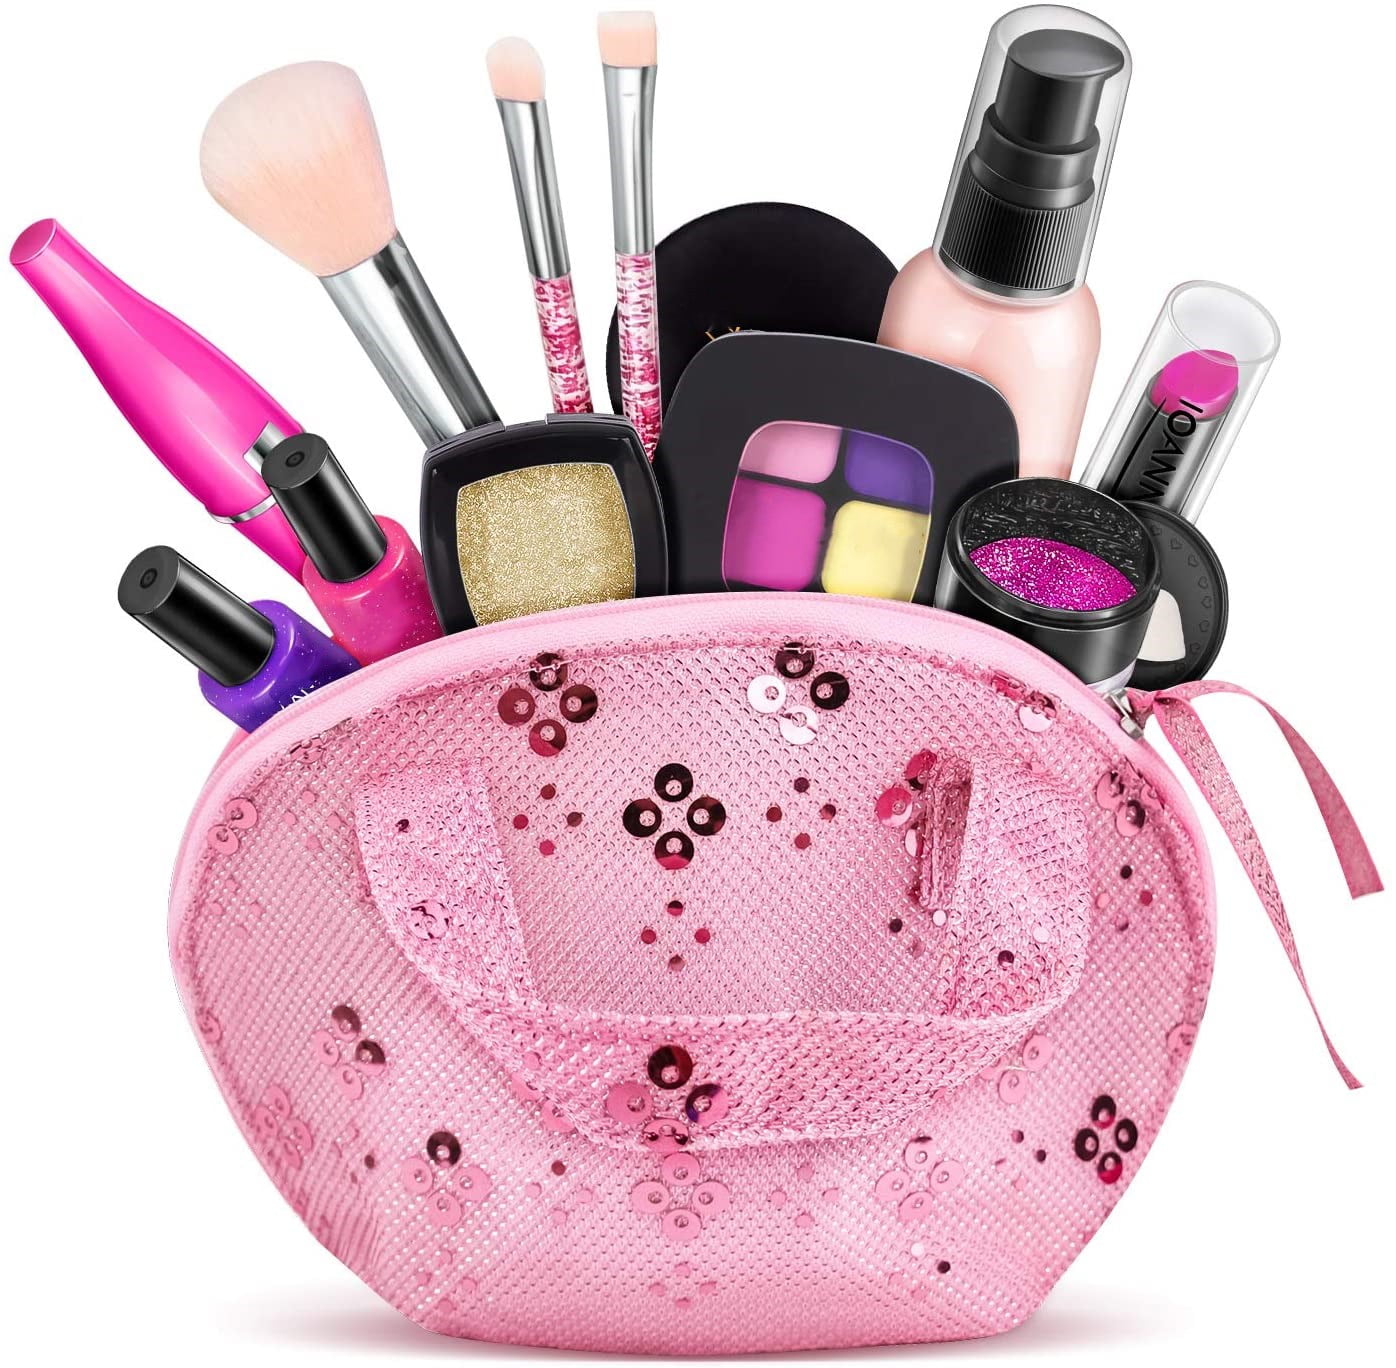 Kids Pretend Makeup Kit with Cosmetic Bag for Girls 3-10 Year Old -  Including Pink Brushes,Eye Shadows, Lipstick,Mascare,Gittler Pot, Liquid  Foundation,Nail polish bottle and More(Not Real Makeup) 